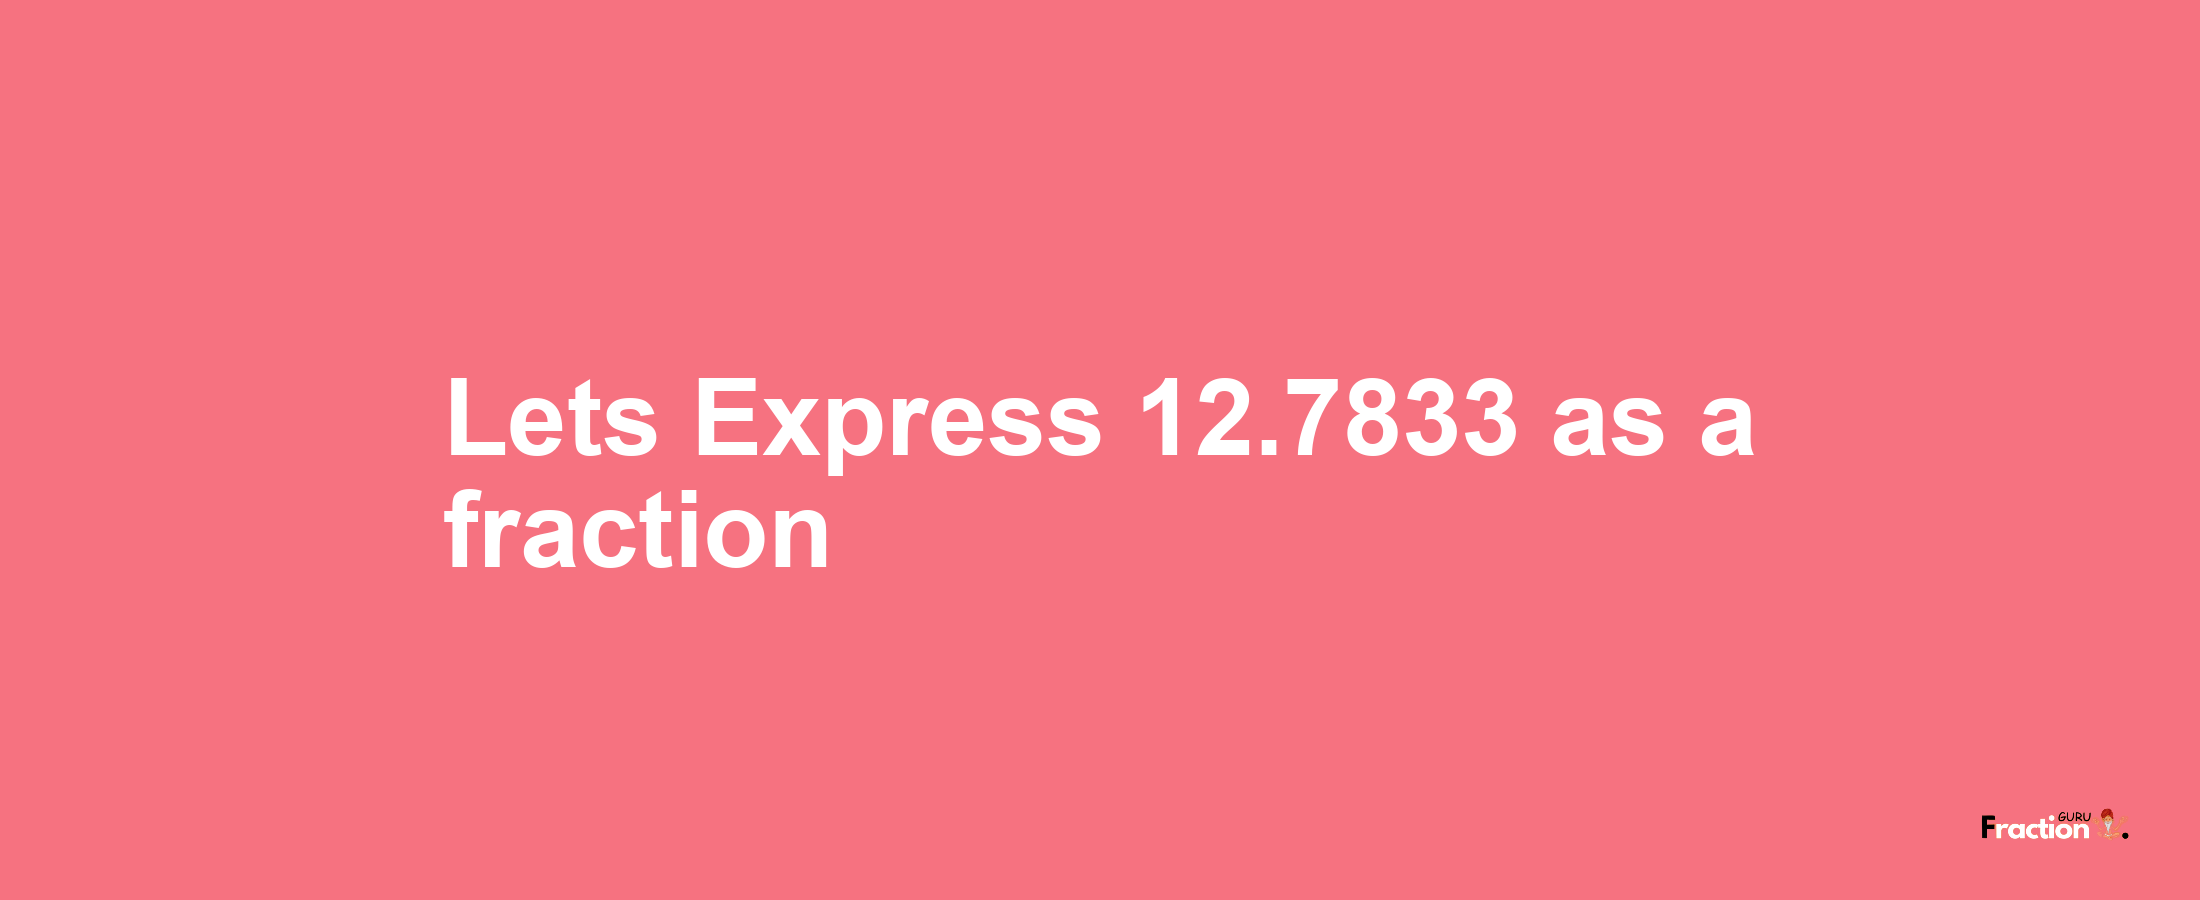 Lets Express 12.7833 as afraction